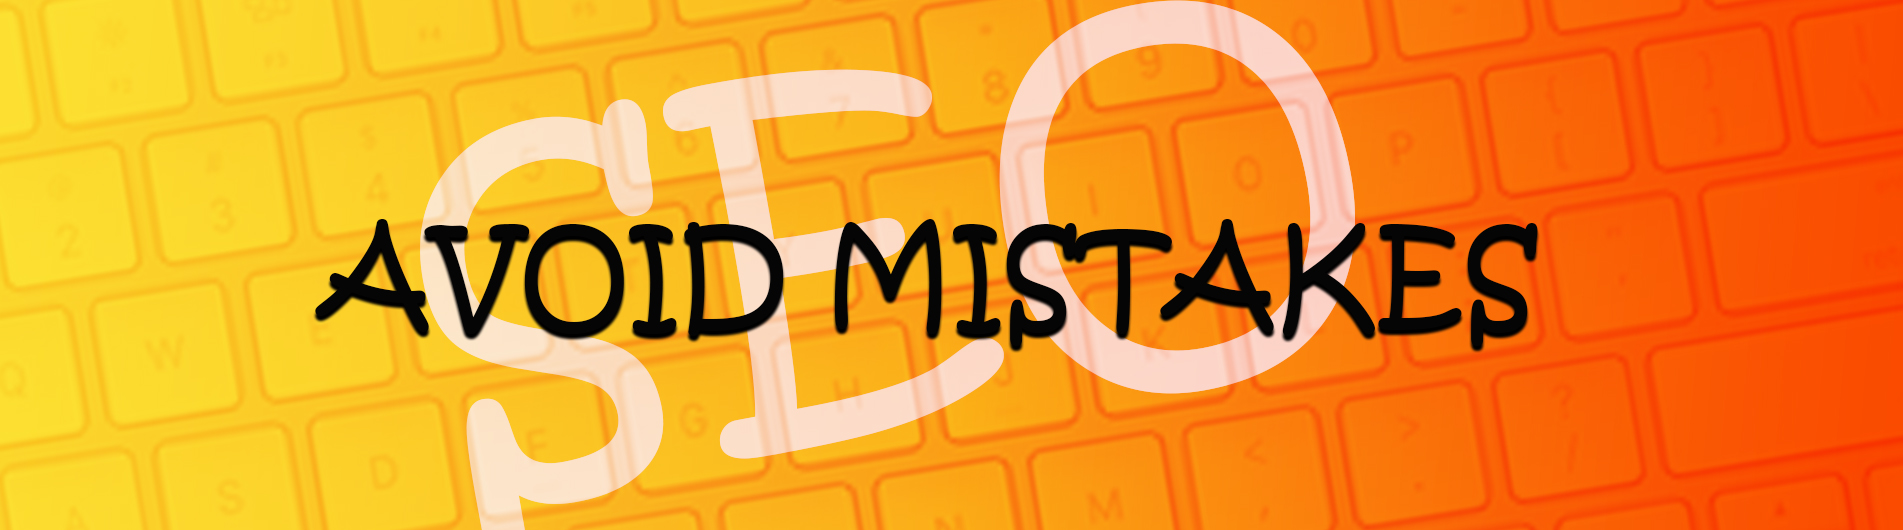 Common Local SEO Mistakes to Avoid